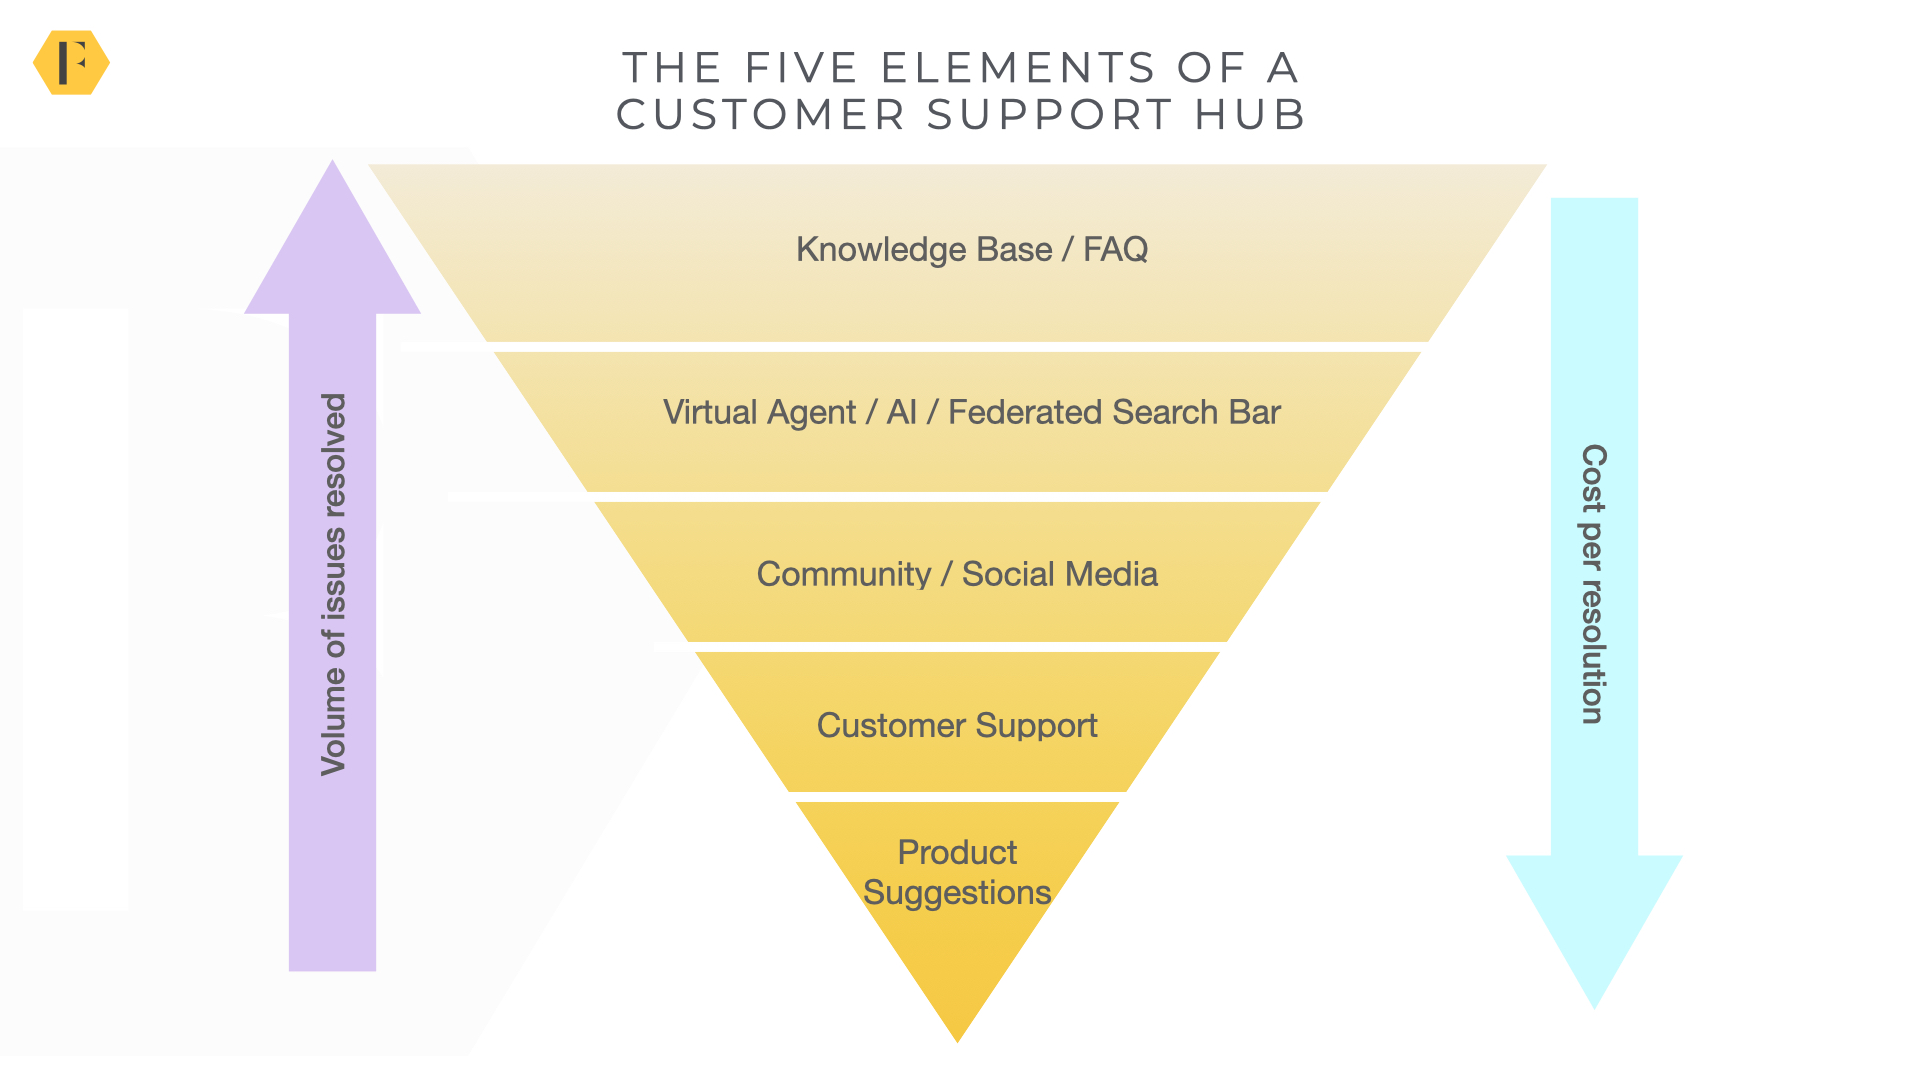 Five layers of the support hub are knowledge base, virtual agents/search, community/social media, customer support, and product suggestions.